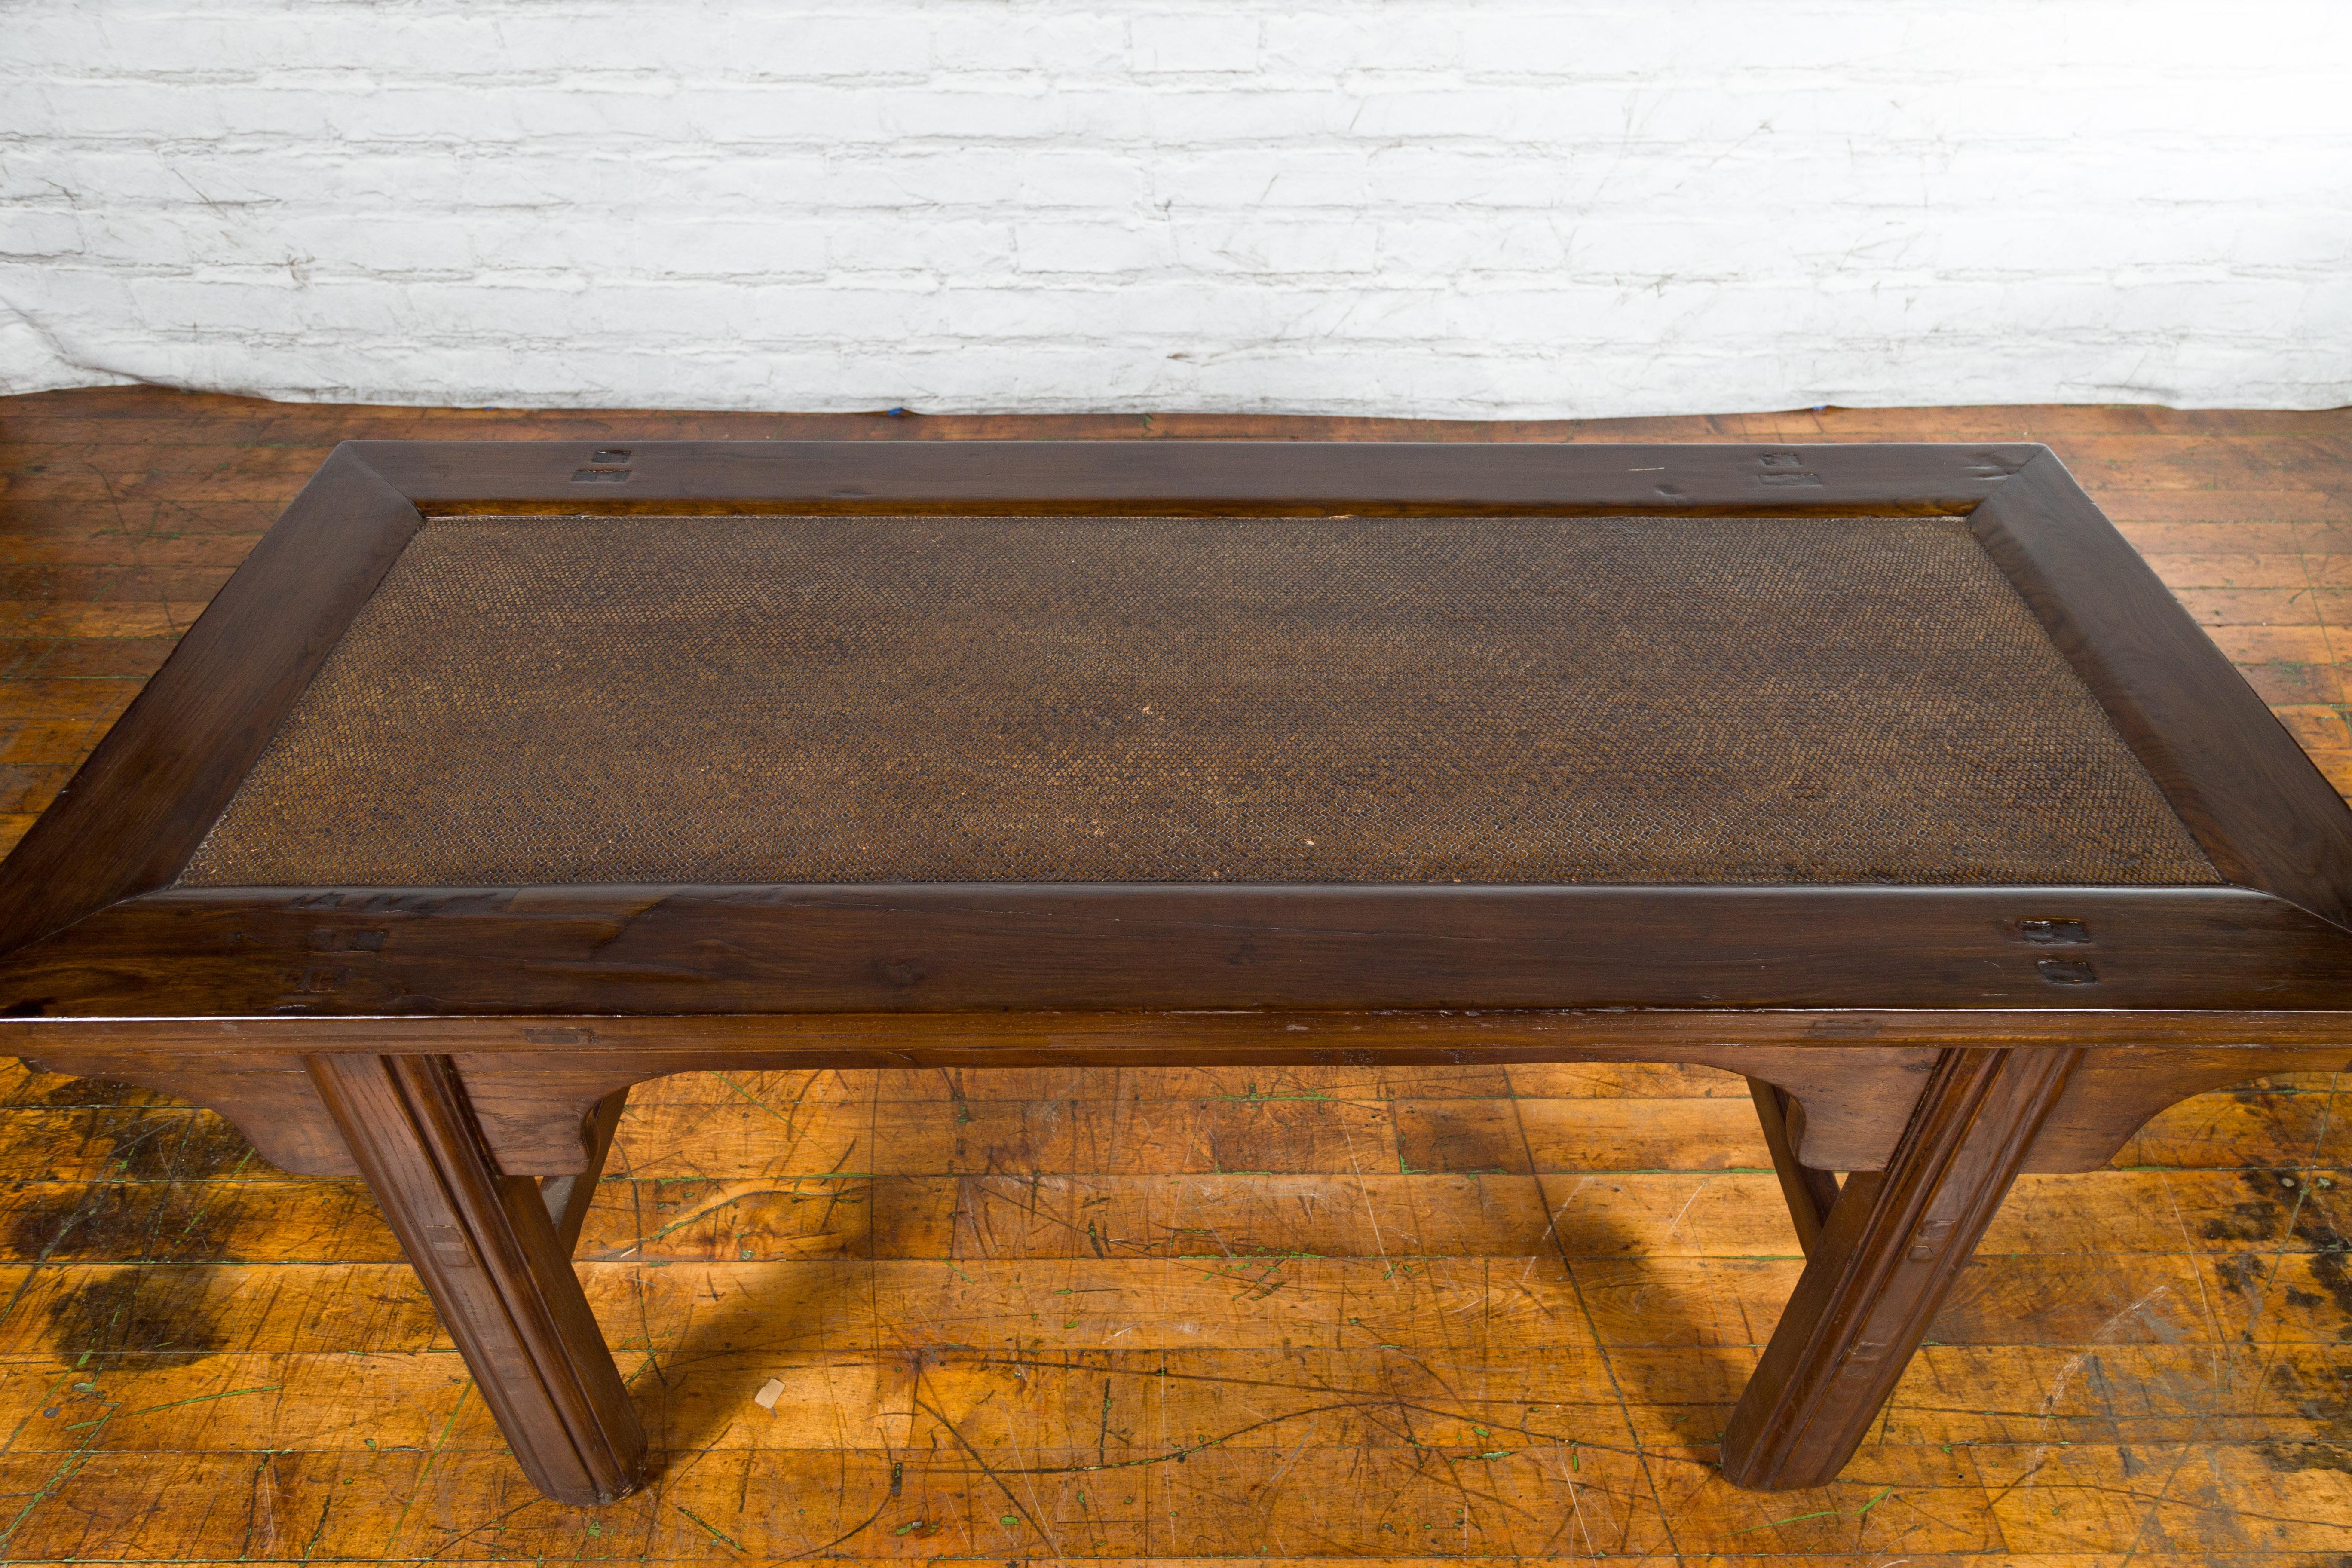 Qing Dynasty 19th Century Coffee Table with Rattan Insert Top and Carved Apron For Sale 5